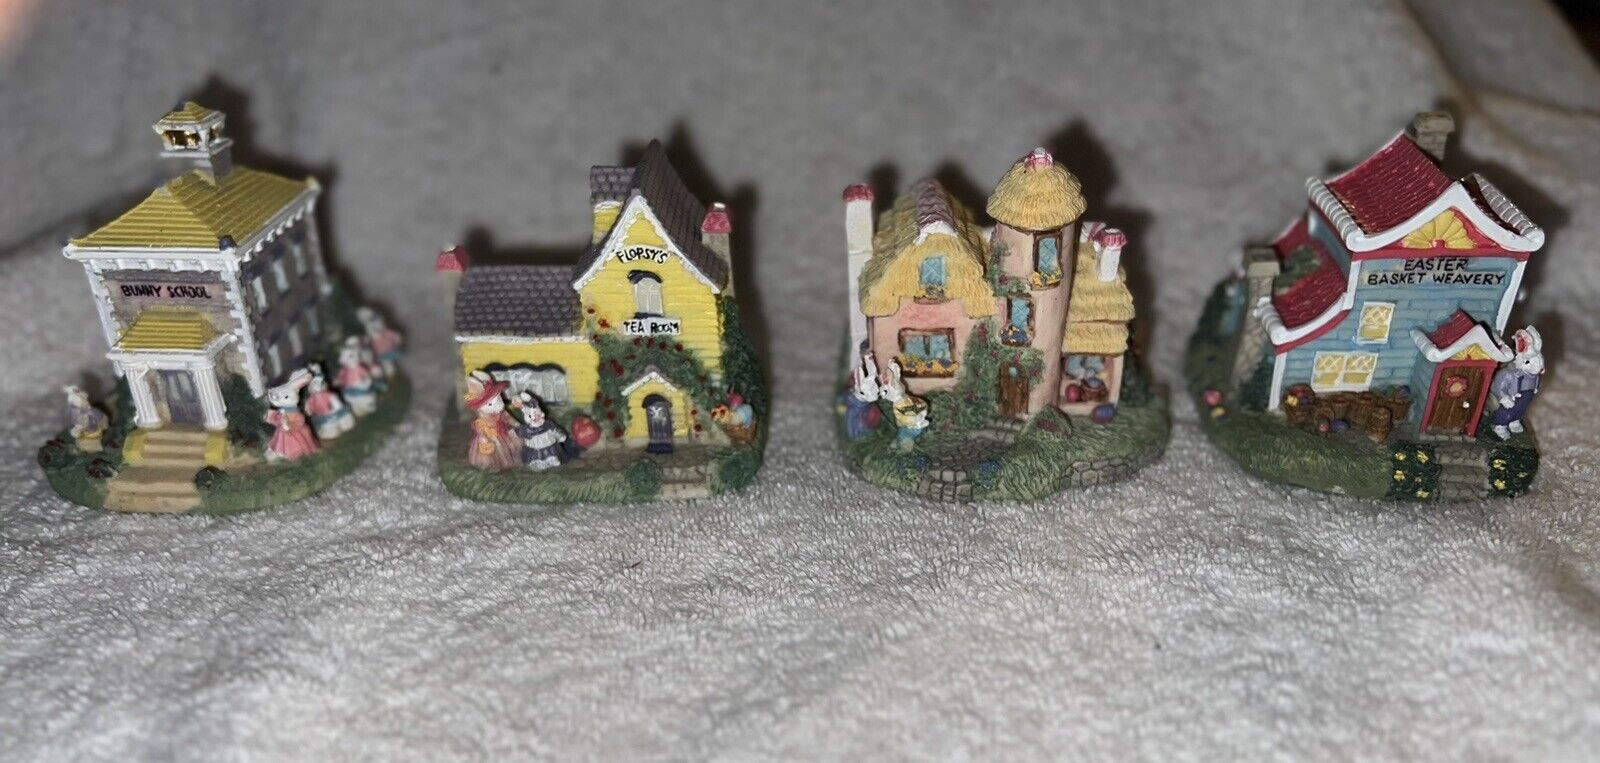 The Bunny Family Village Dillards Retired Decorations 1995 Vintage